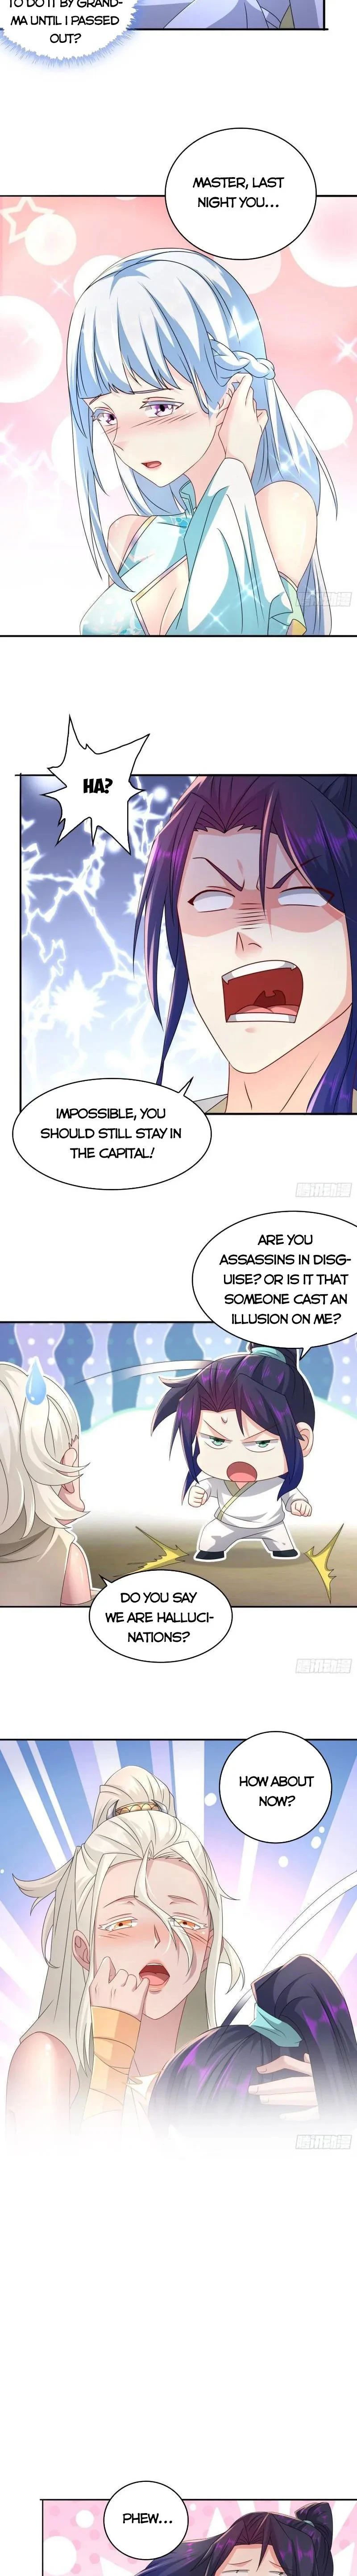 Forced to Become the Villain's Son-in-law Chapter 394 page 2 - MangaWeebs.in